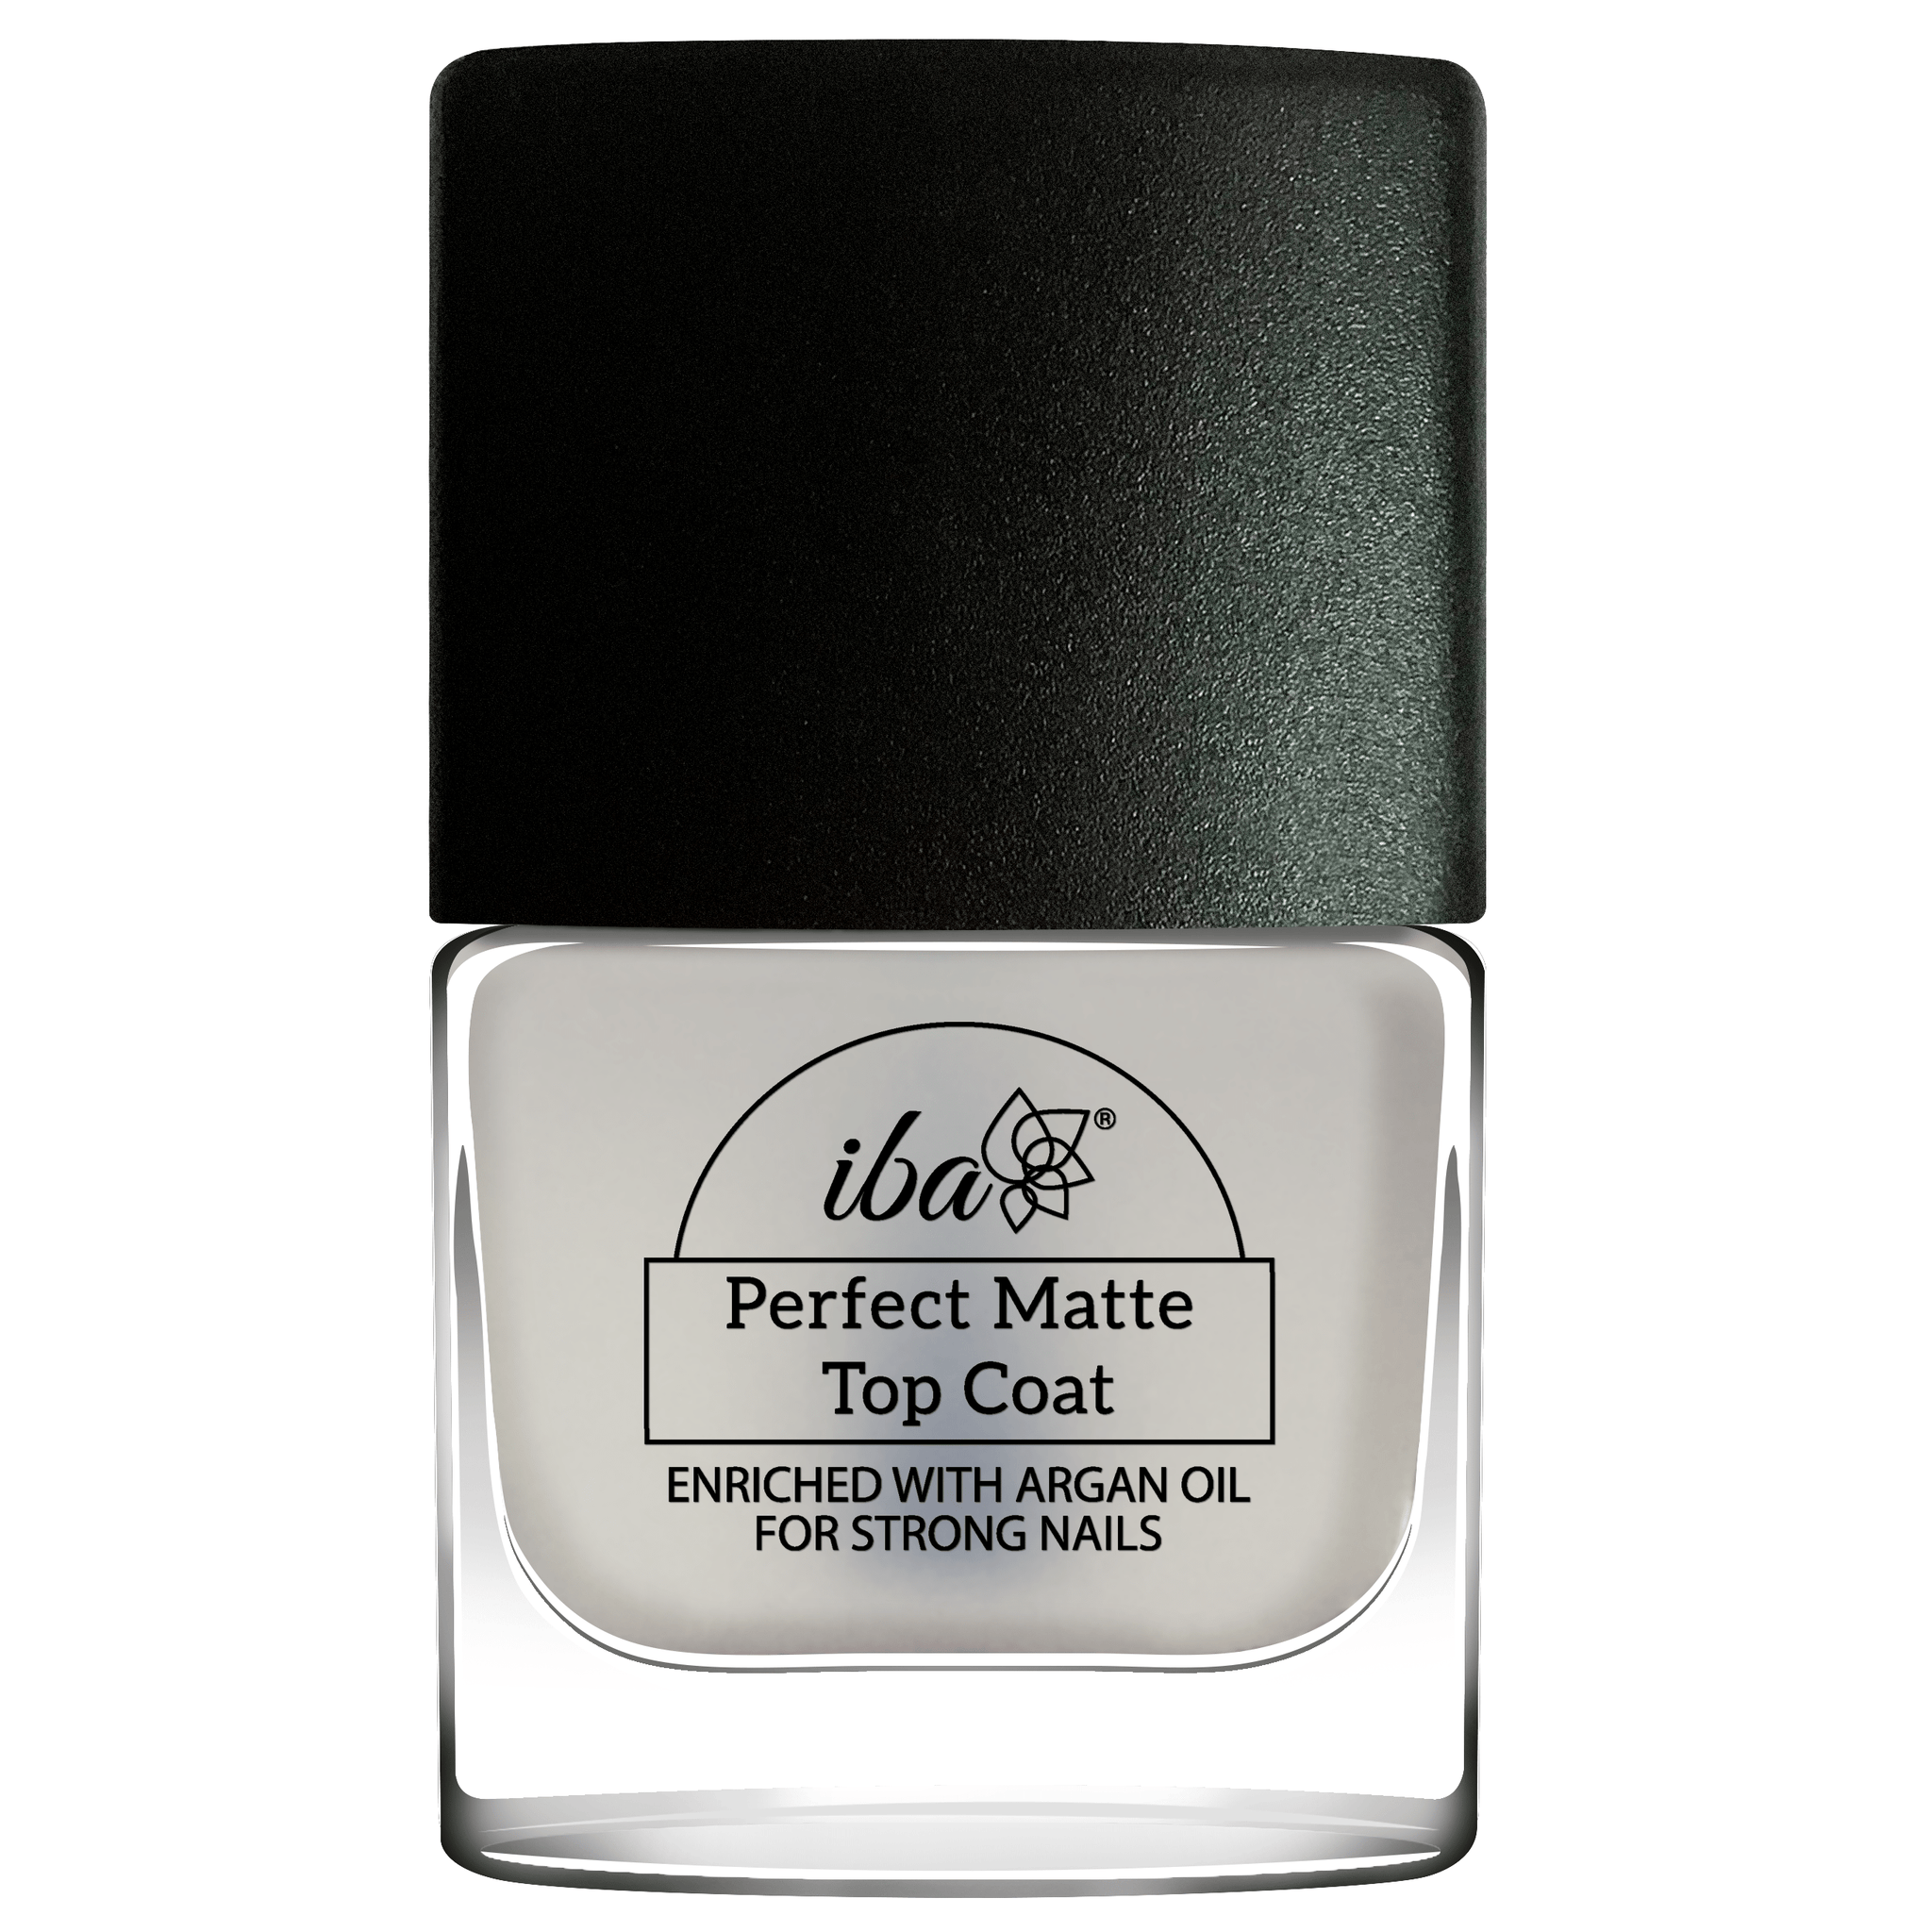 Buy Iba Breathable Nail Polish Online at Best Price - Iba Cosmetics